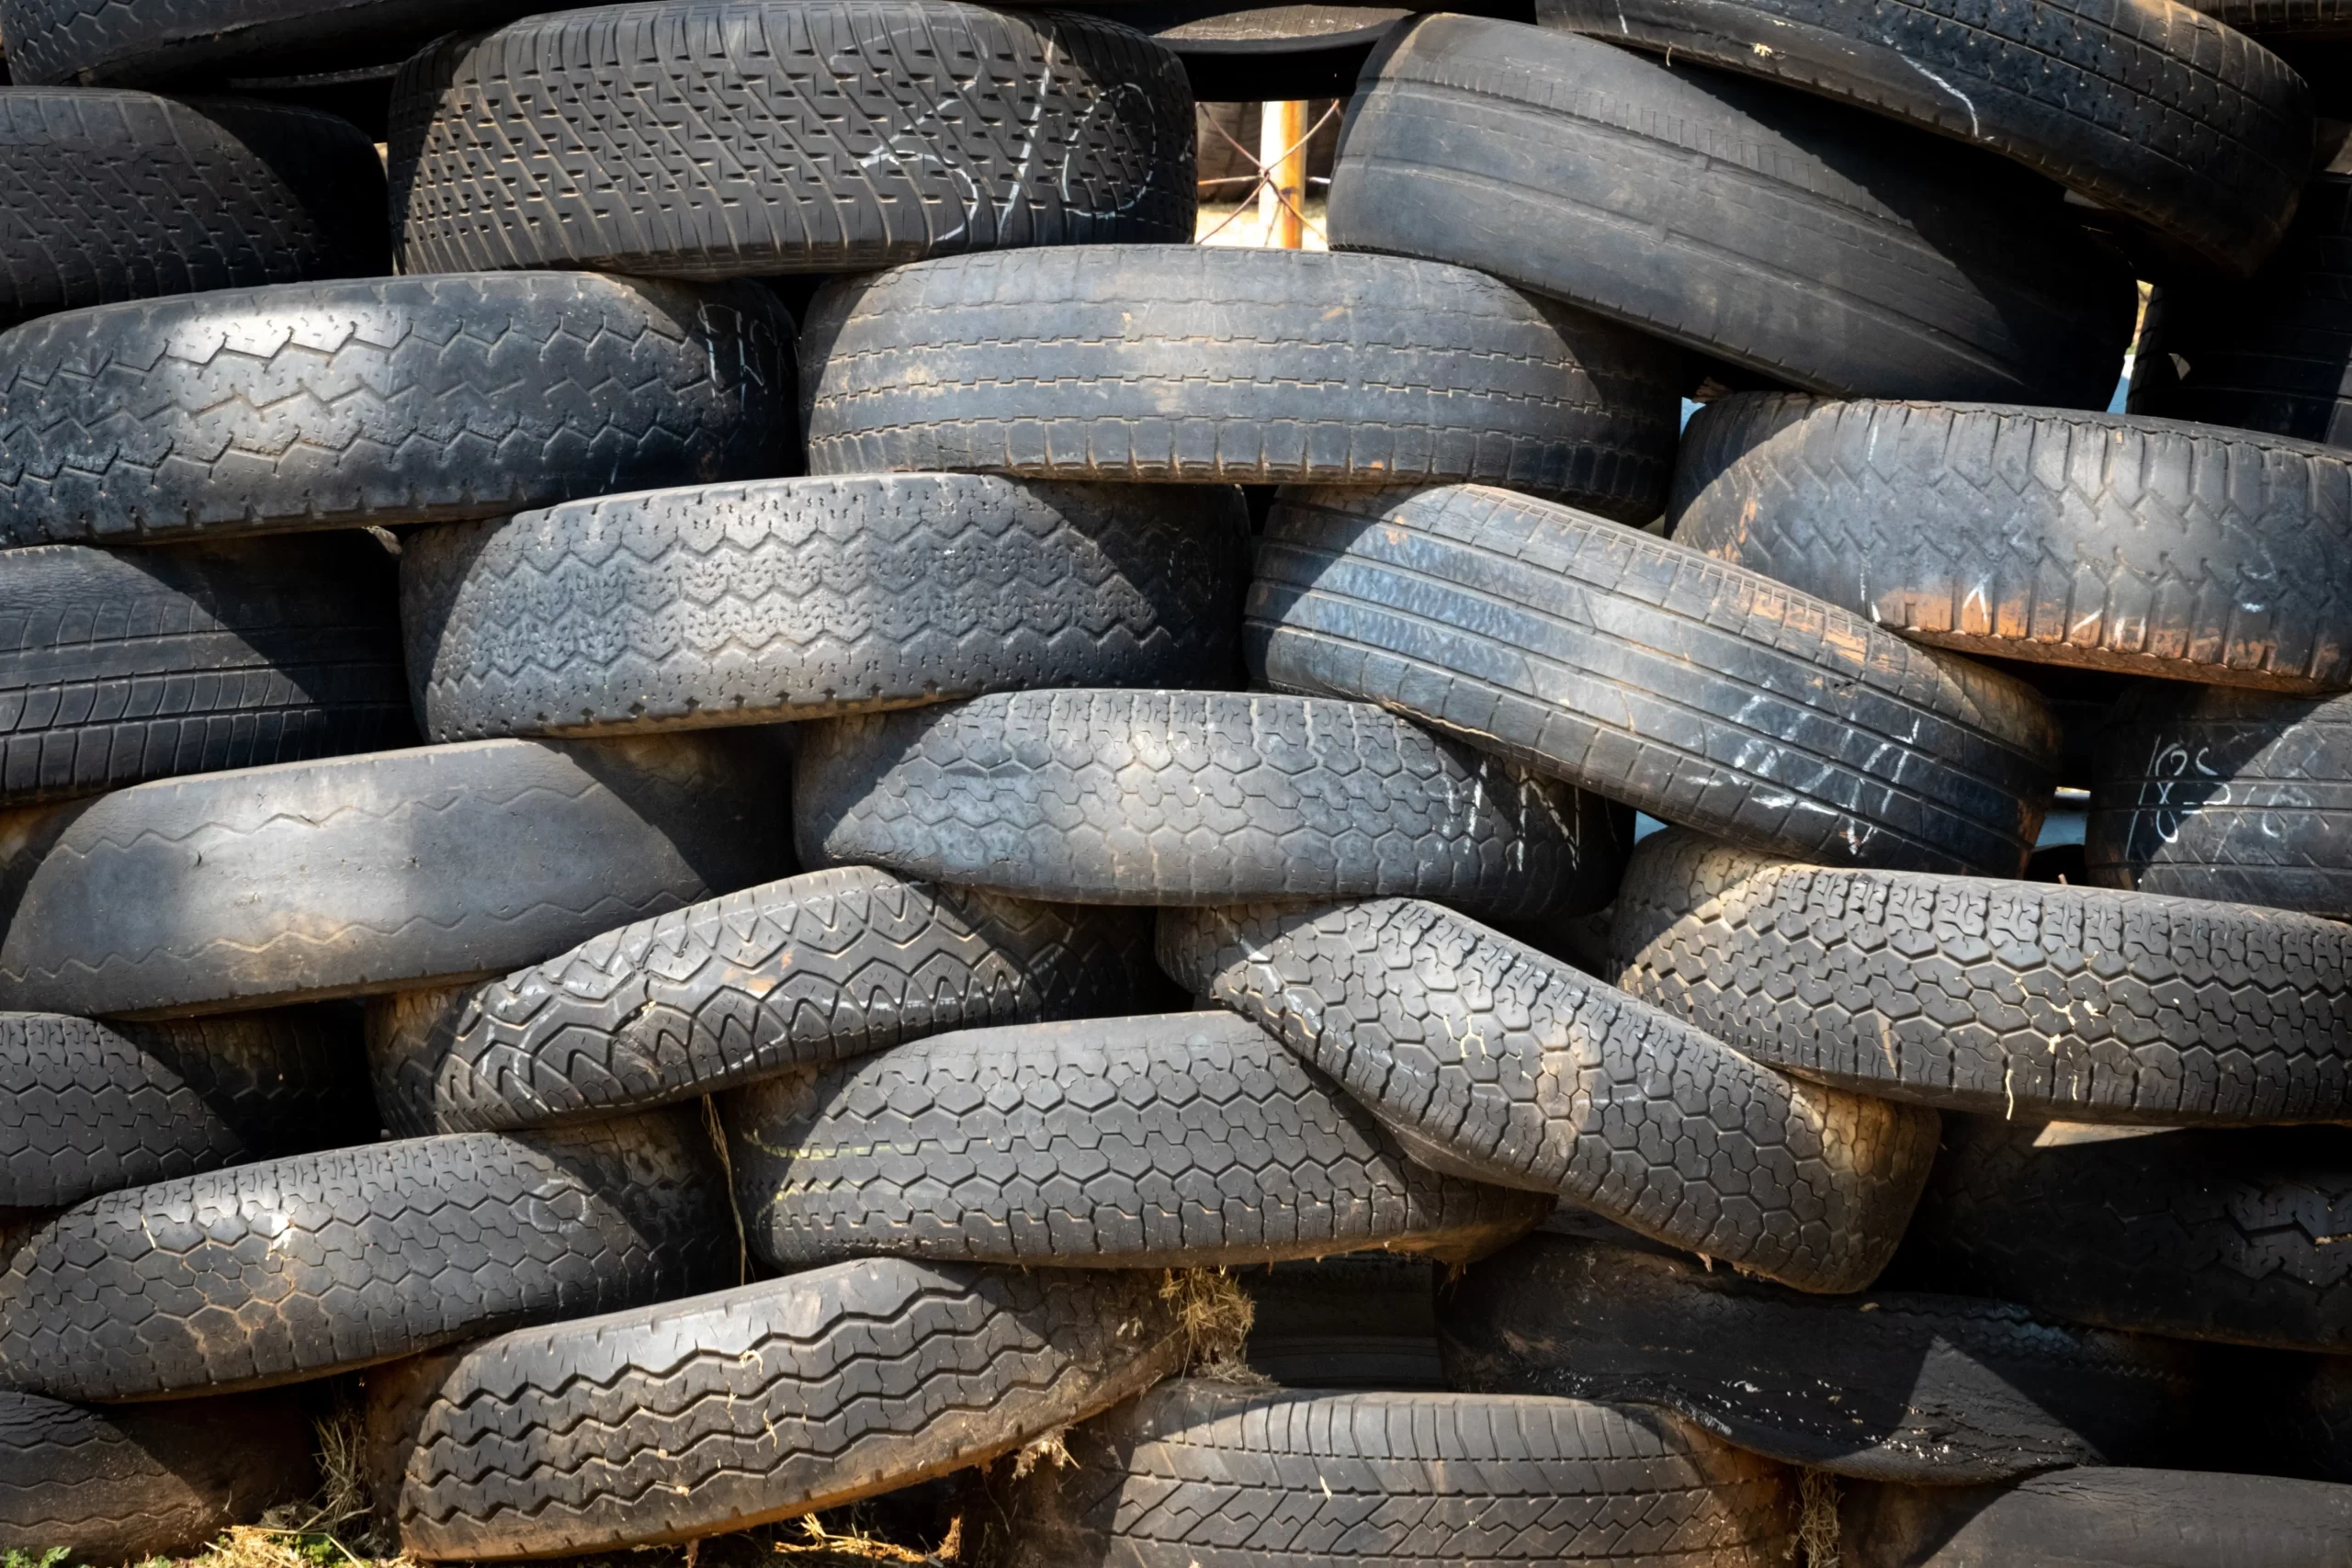 The Ultimate Guide on How to Properly Store Tires in Your Garage - HDR ...